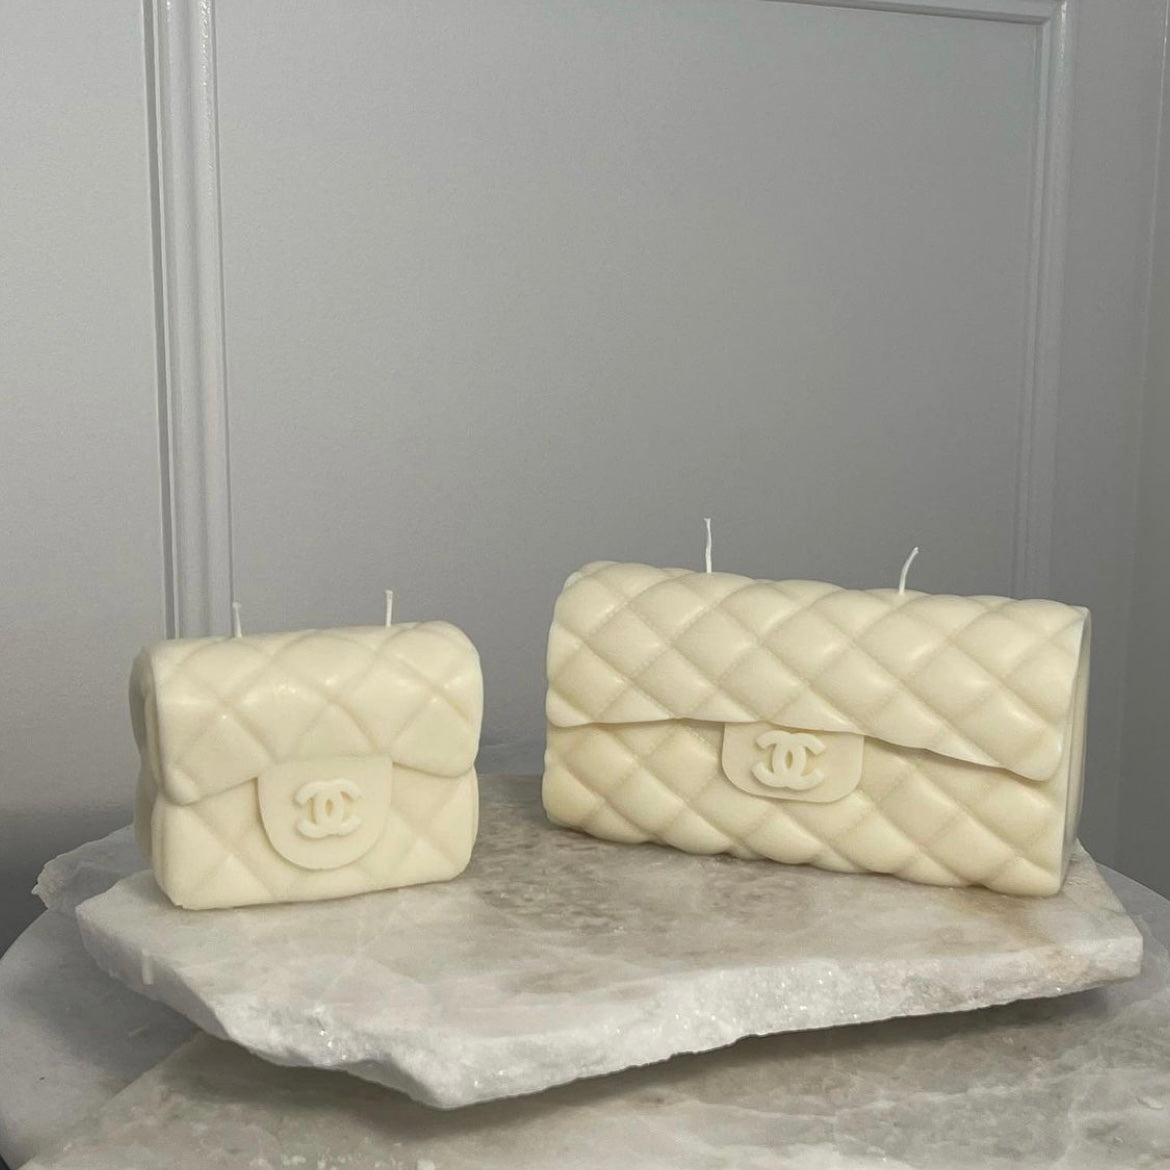 where can i buy a chanel purse